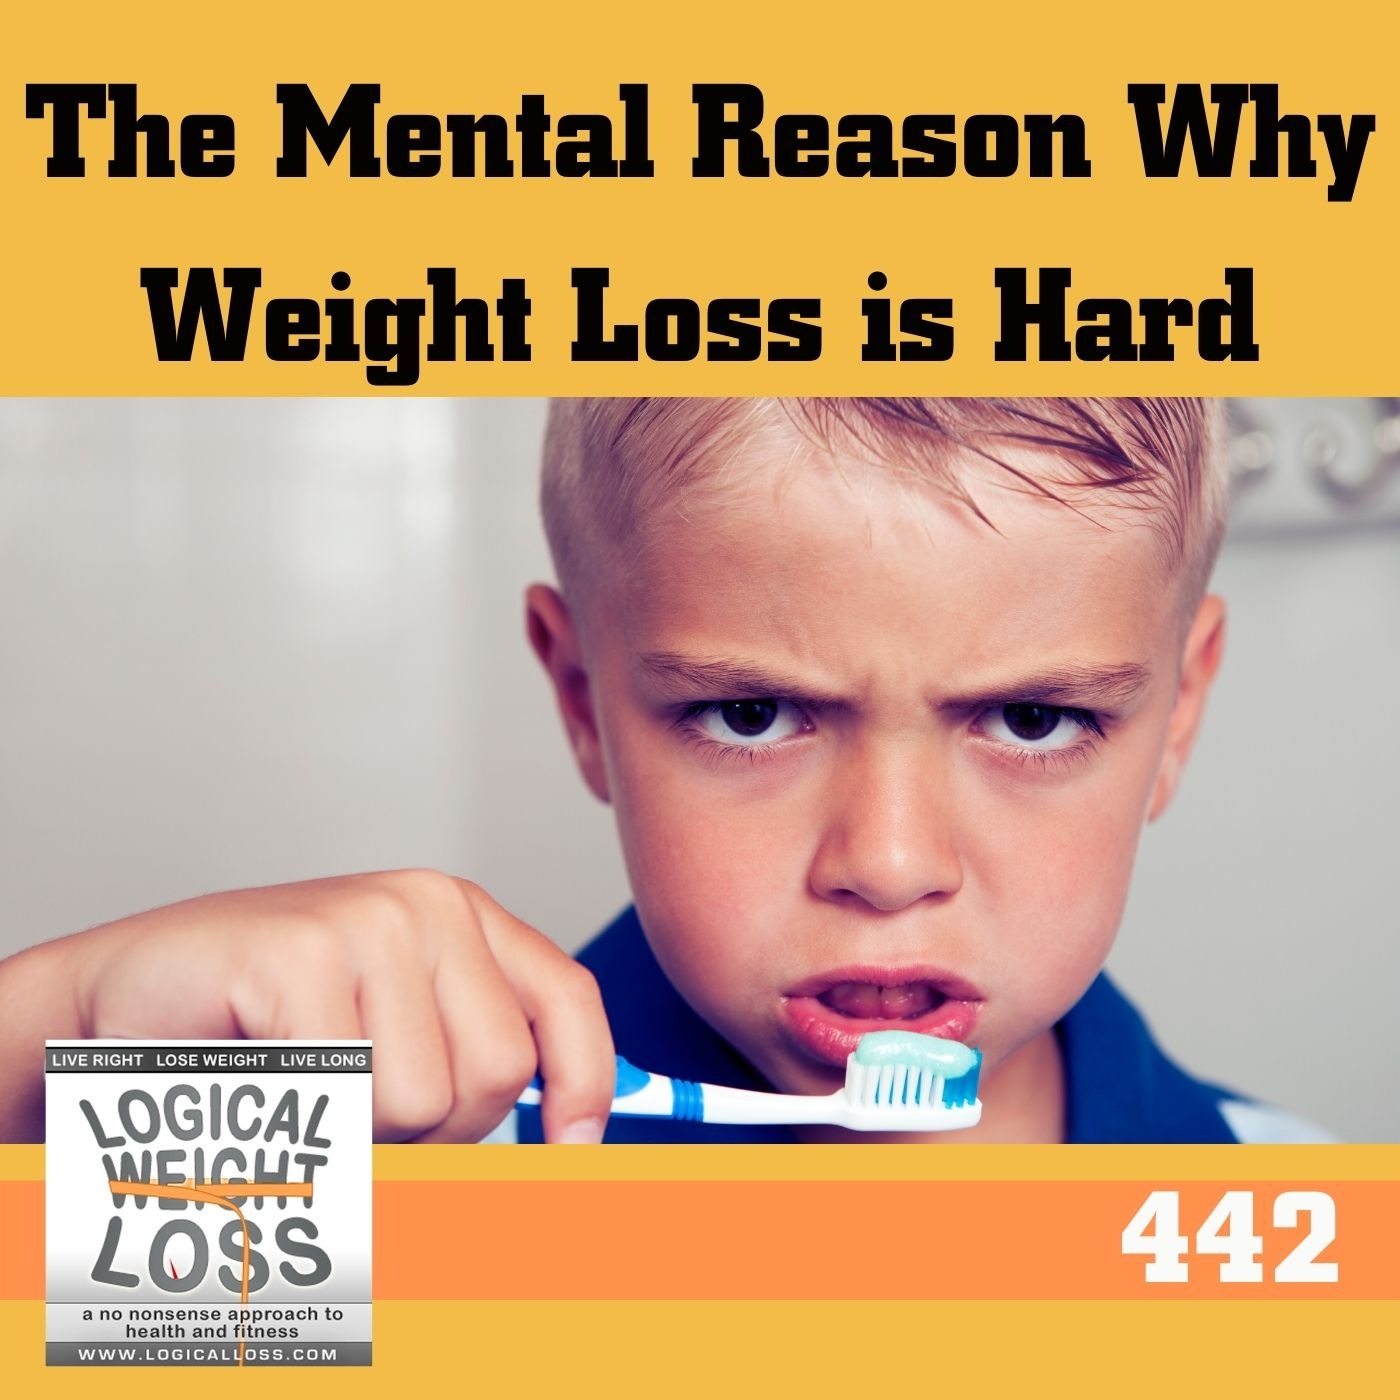 The Mental Reason Why Weight Loss is Hard